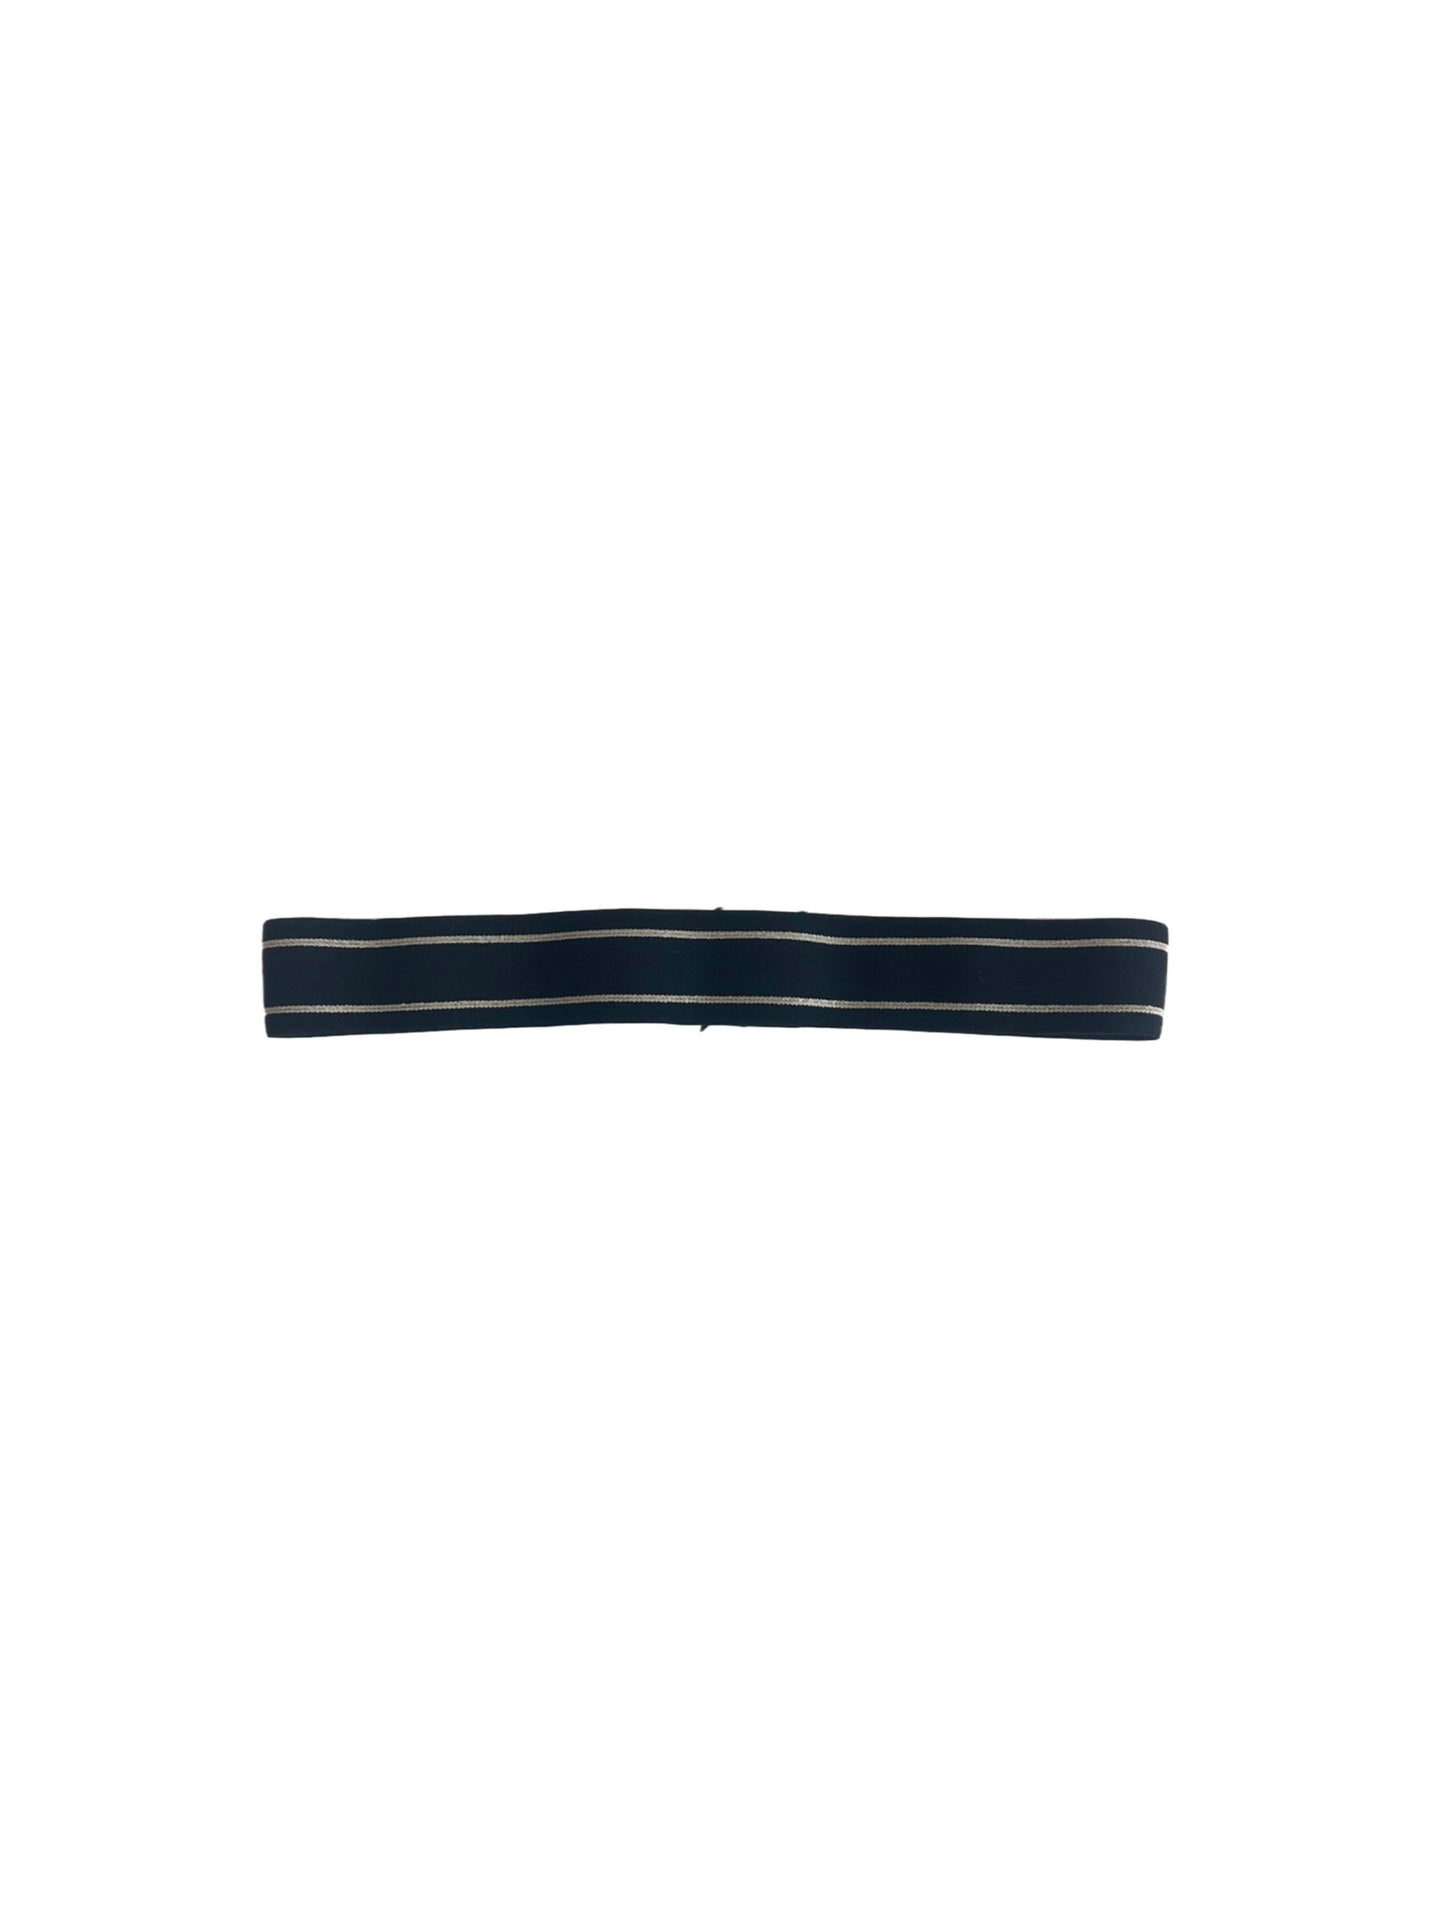 elastic hat band 1 inch black with two white stripes